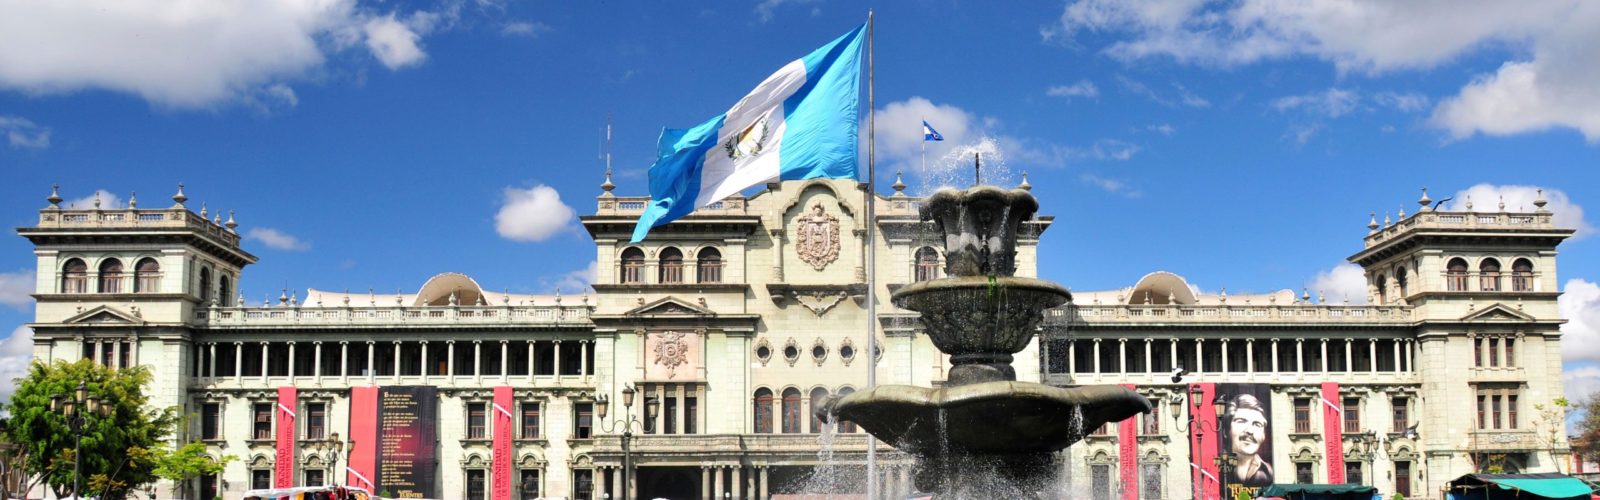 The fountain of Constitution Plaza lined with locals on a sunny day, Guatemala City in Guatemala